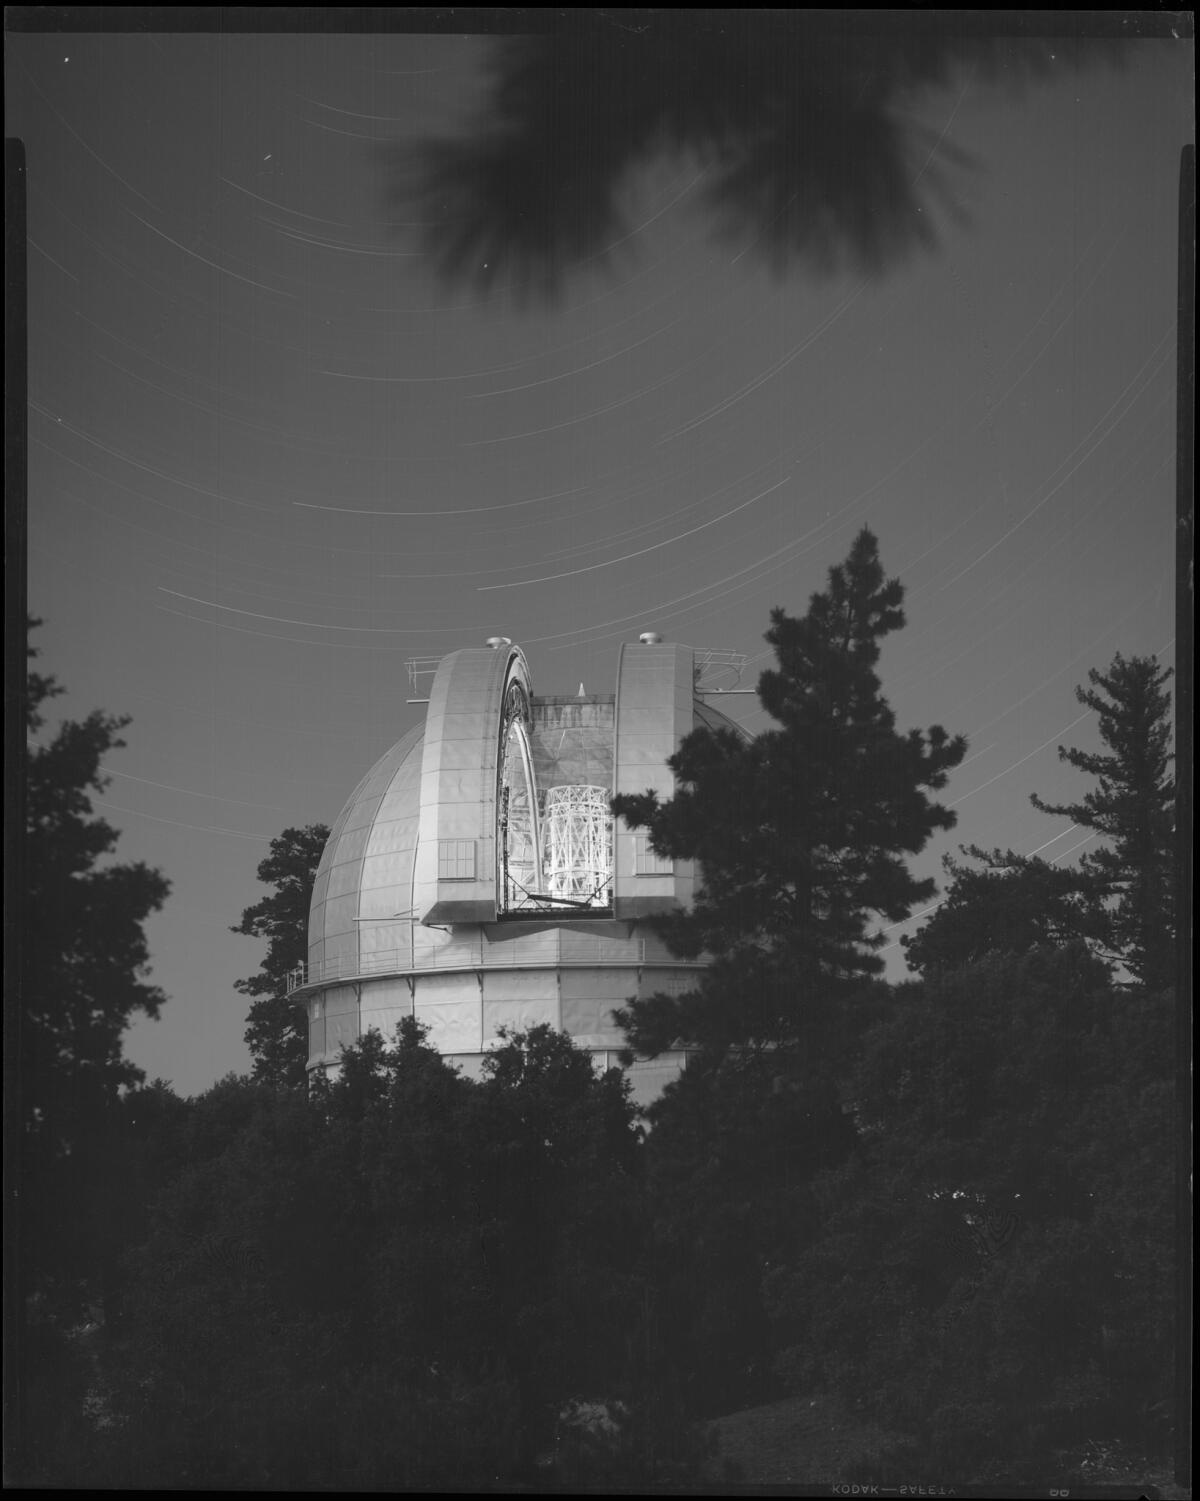 The 100-inch telescope dome at Mt. Wilson Observatory, seen in 1950.